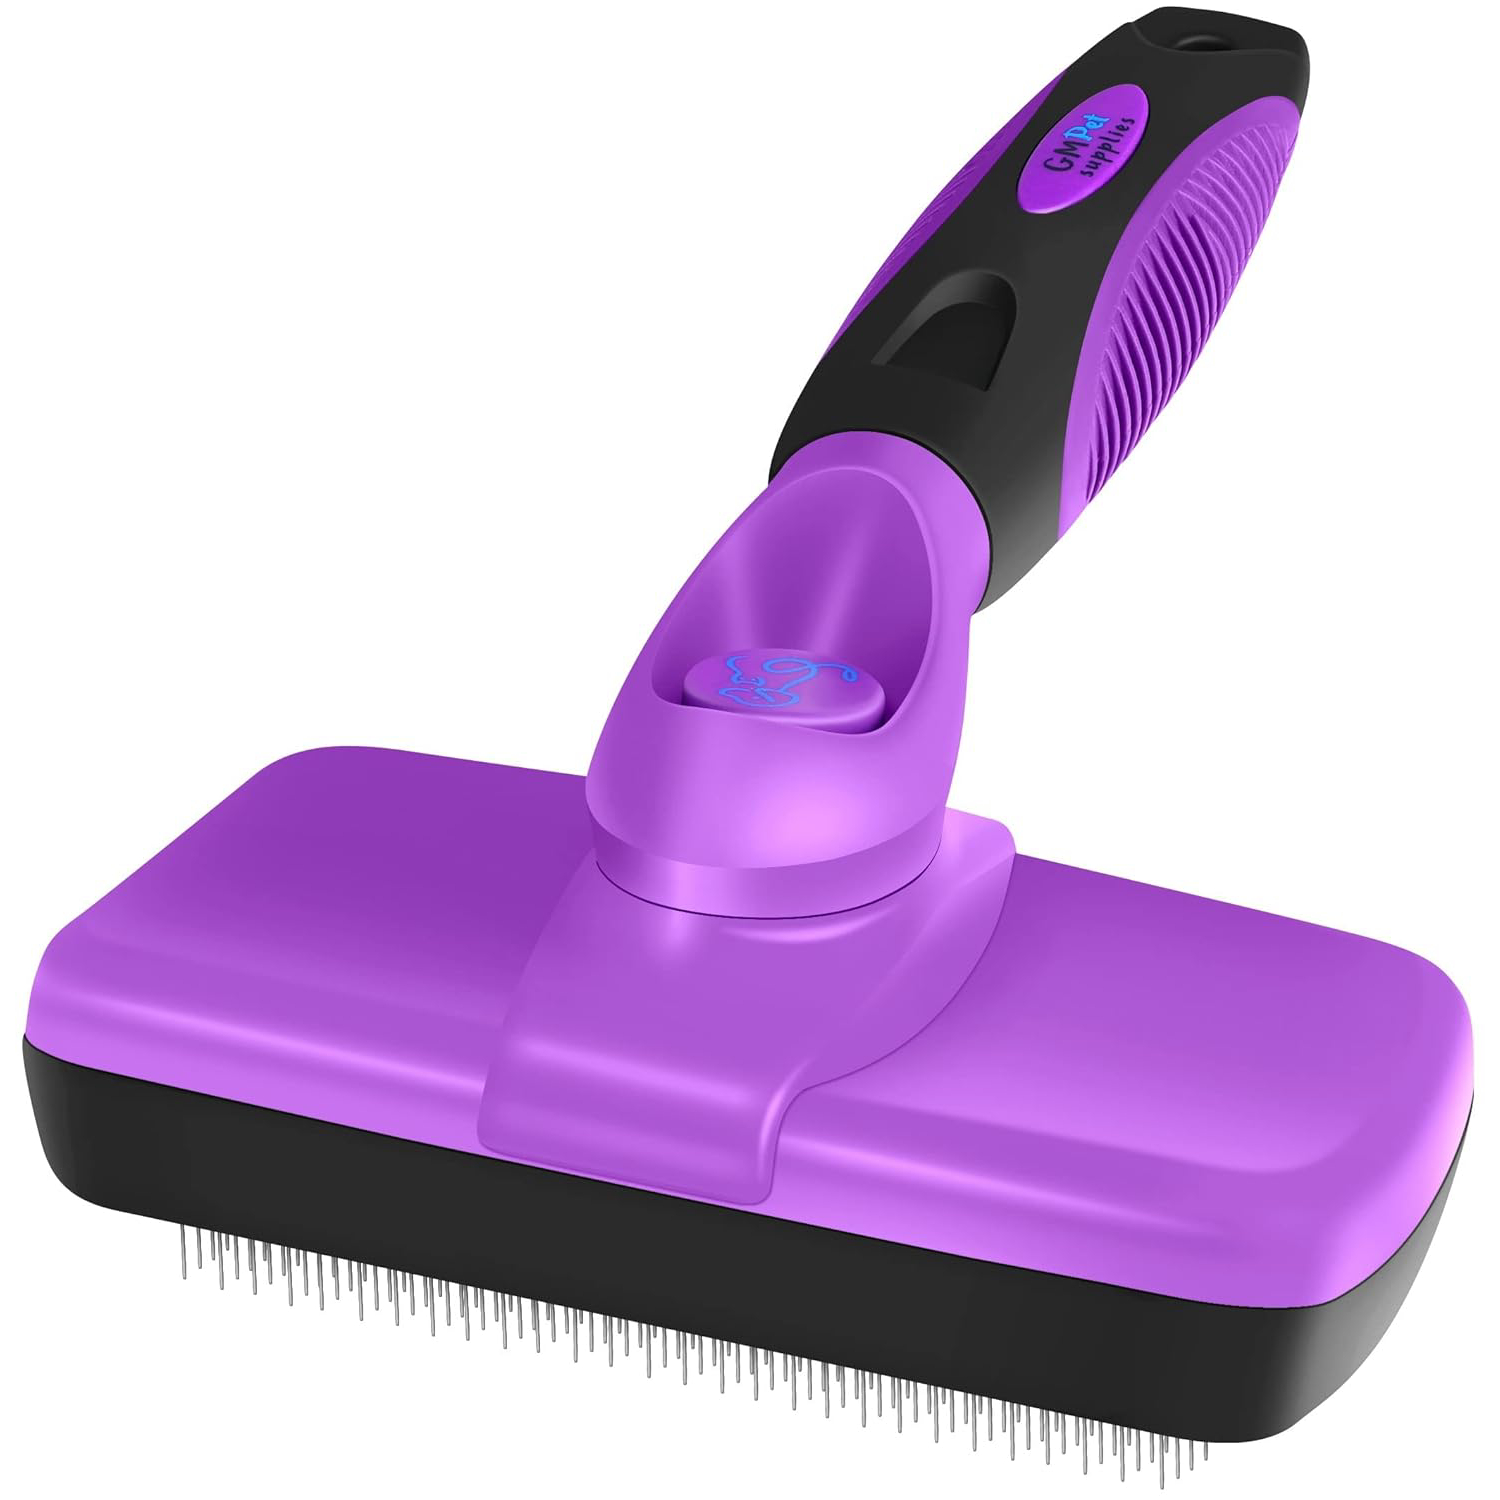 GM Pet Supplies Self Cleaning Slicker Brush _ This is The Best Dog and Cat Brush for Shedding and Grooming _ Our Pet Brushes Are Suitable for All Hair Lengths new